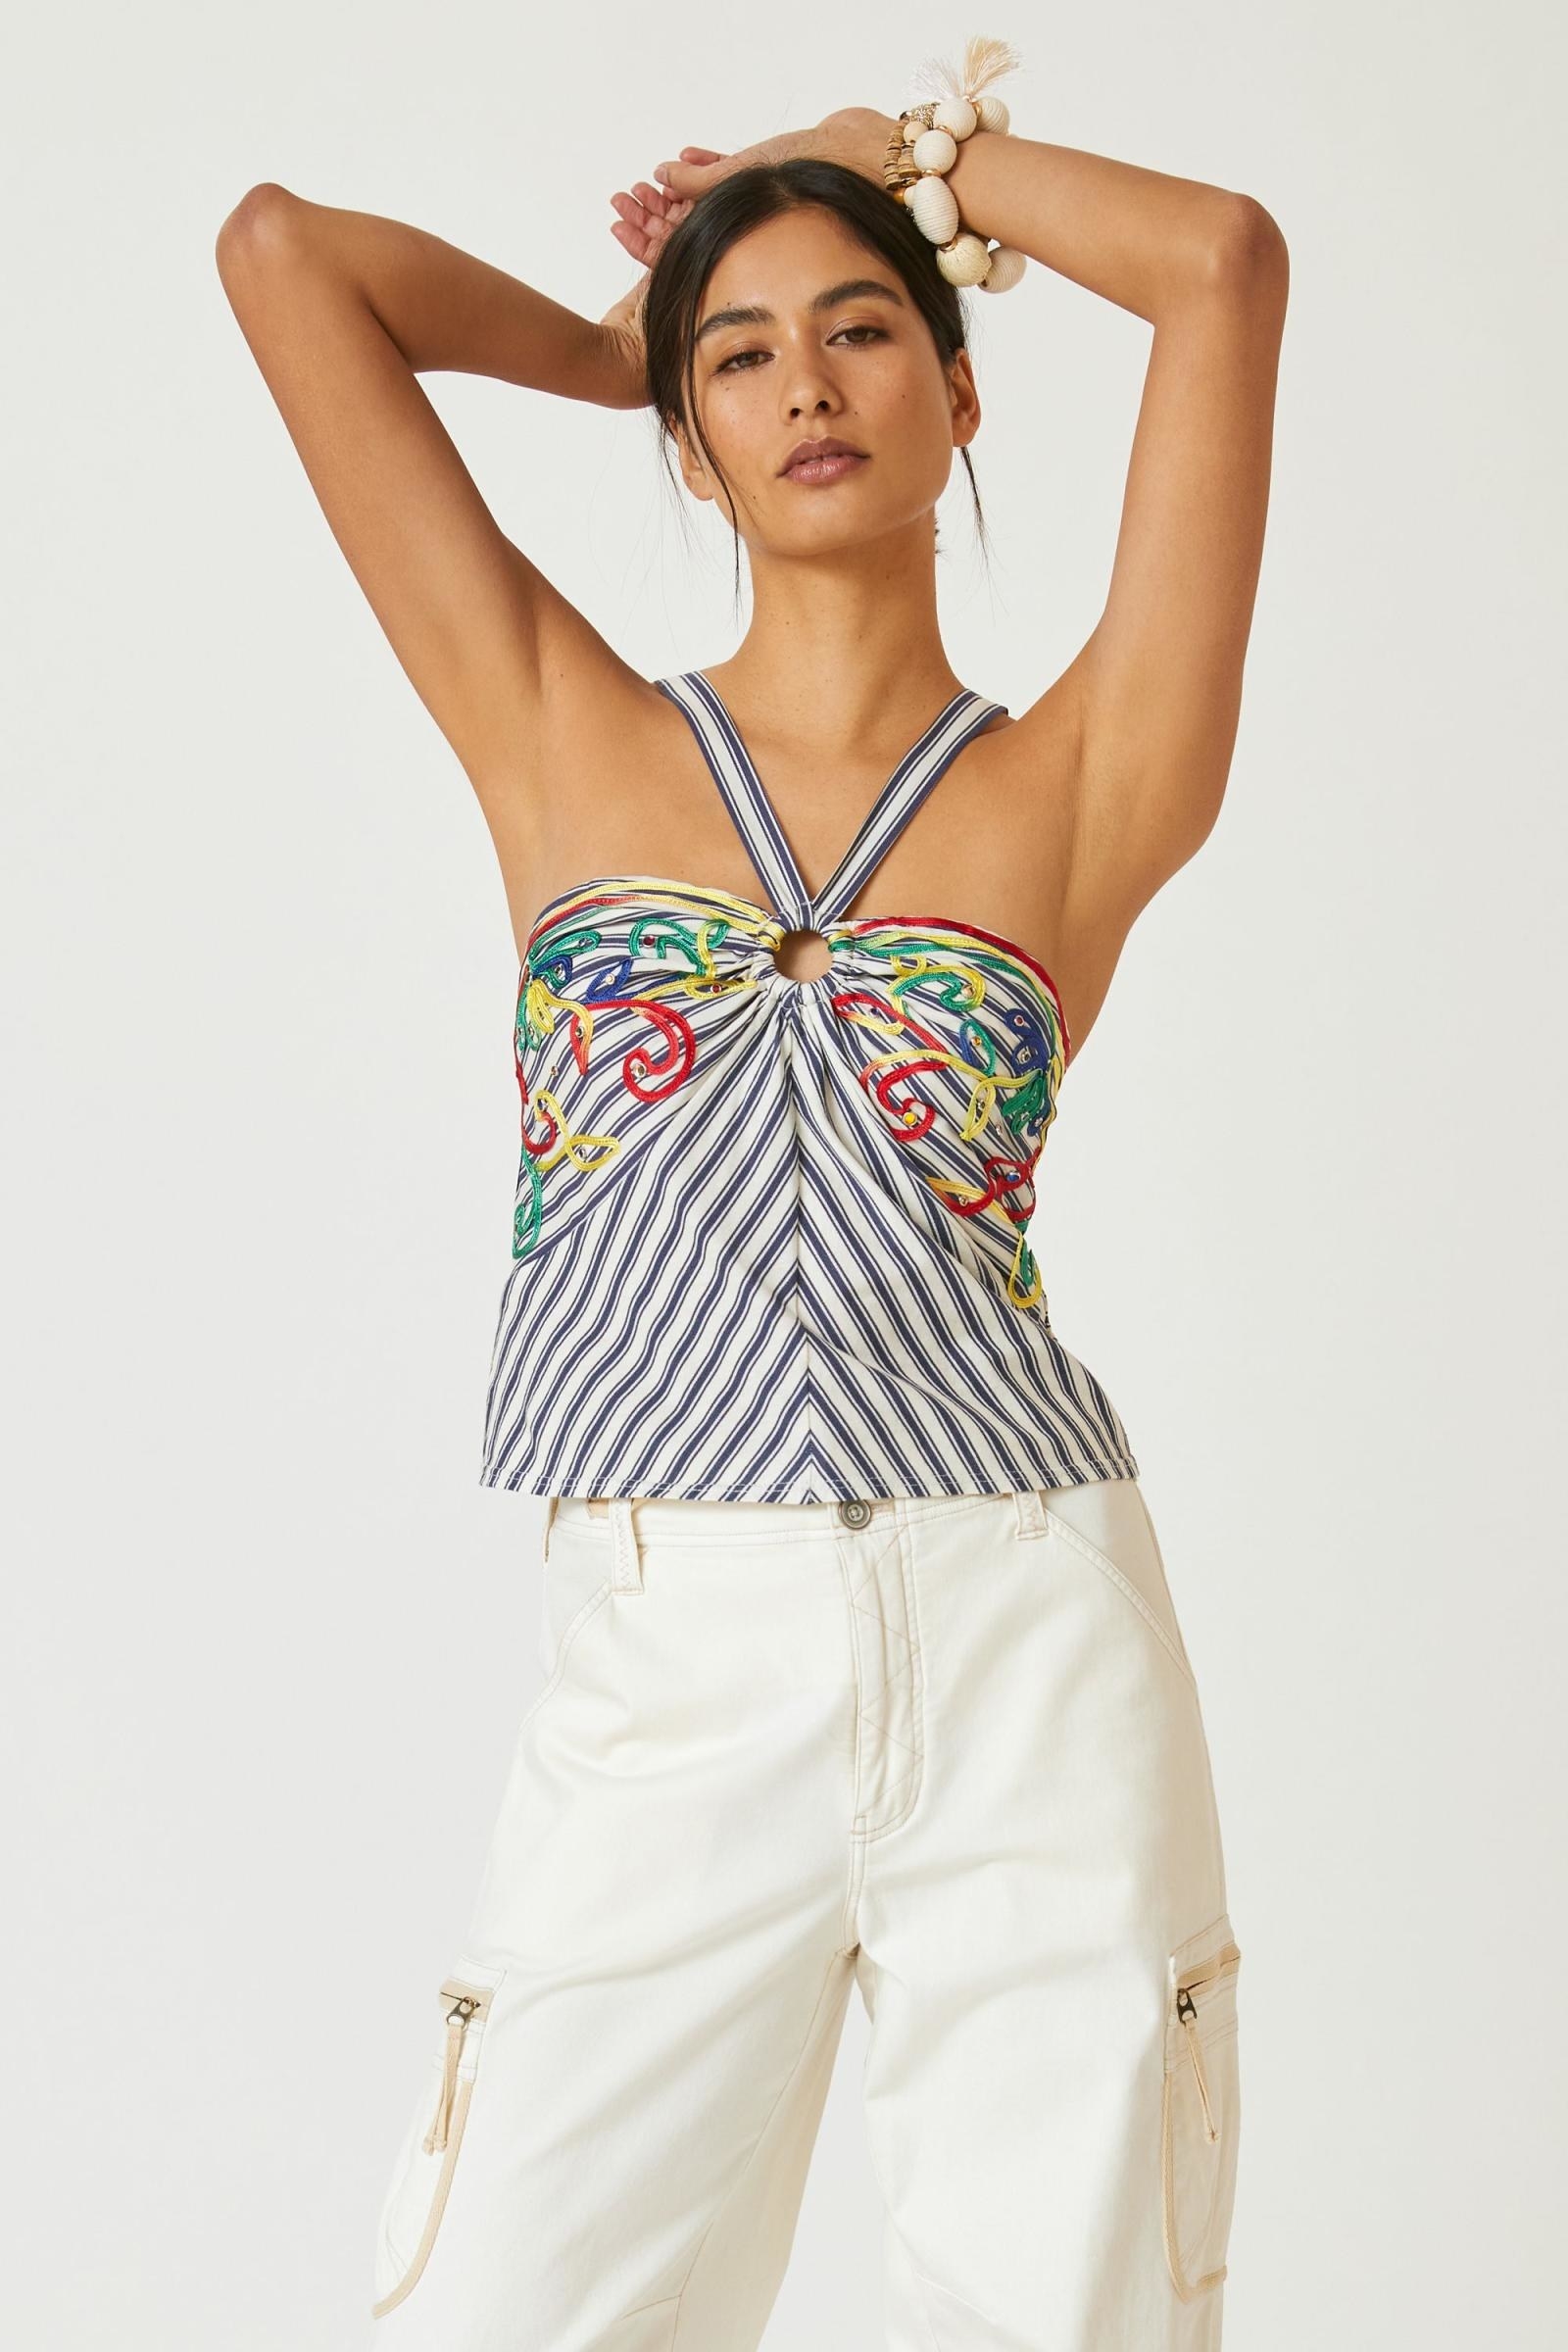 Model wearing navy blue and white striped halter top with green, red, yellow and blue embroidery on top